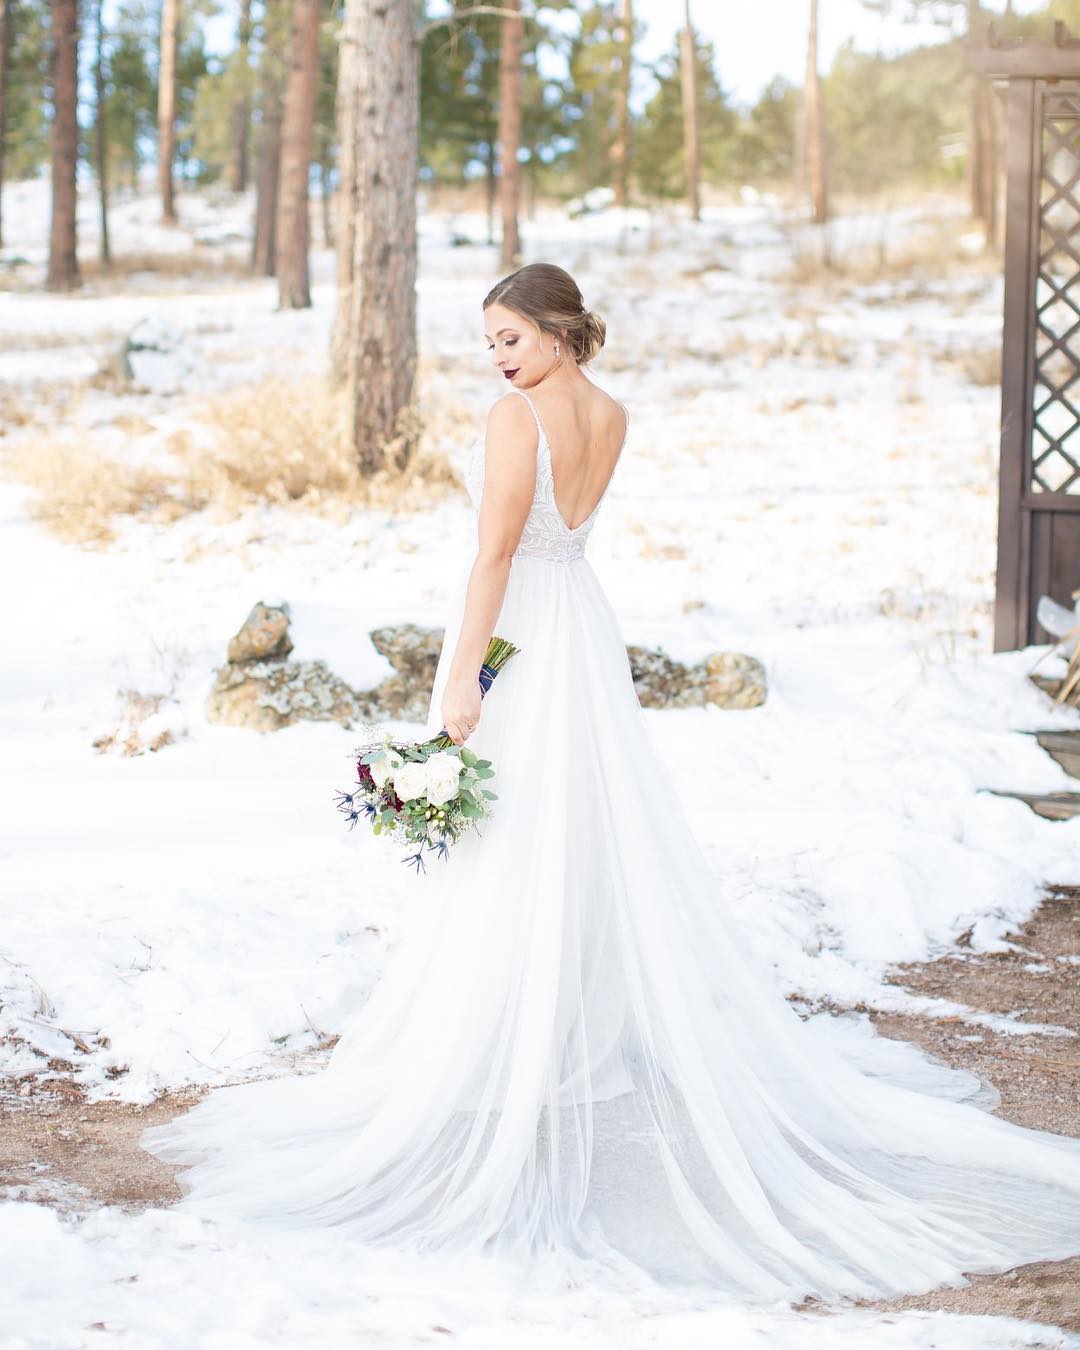 What a beautiful December bride!